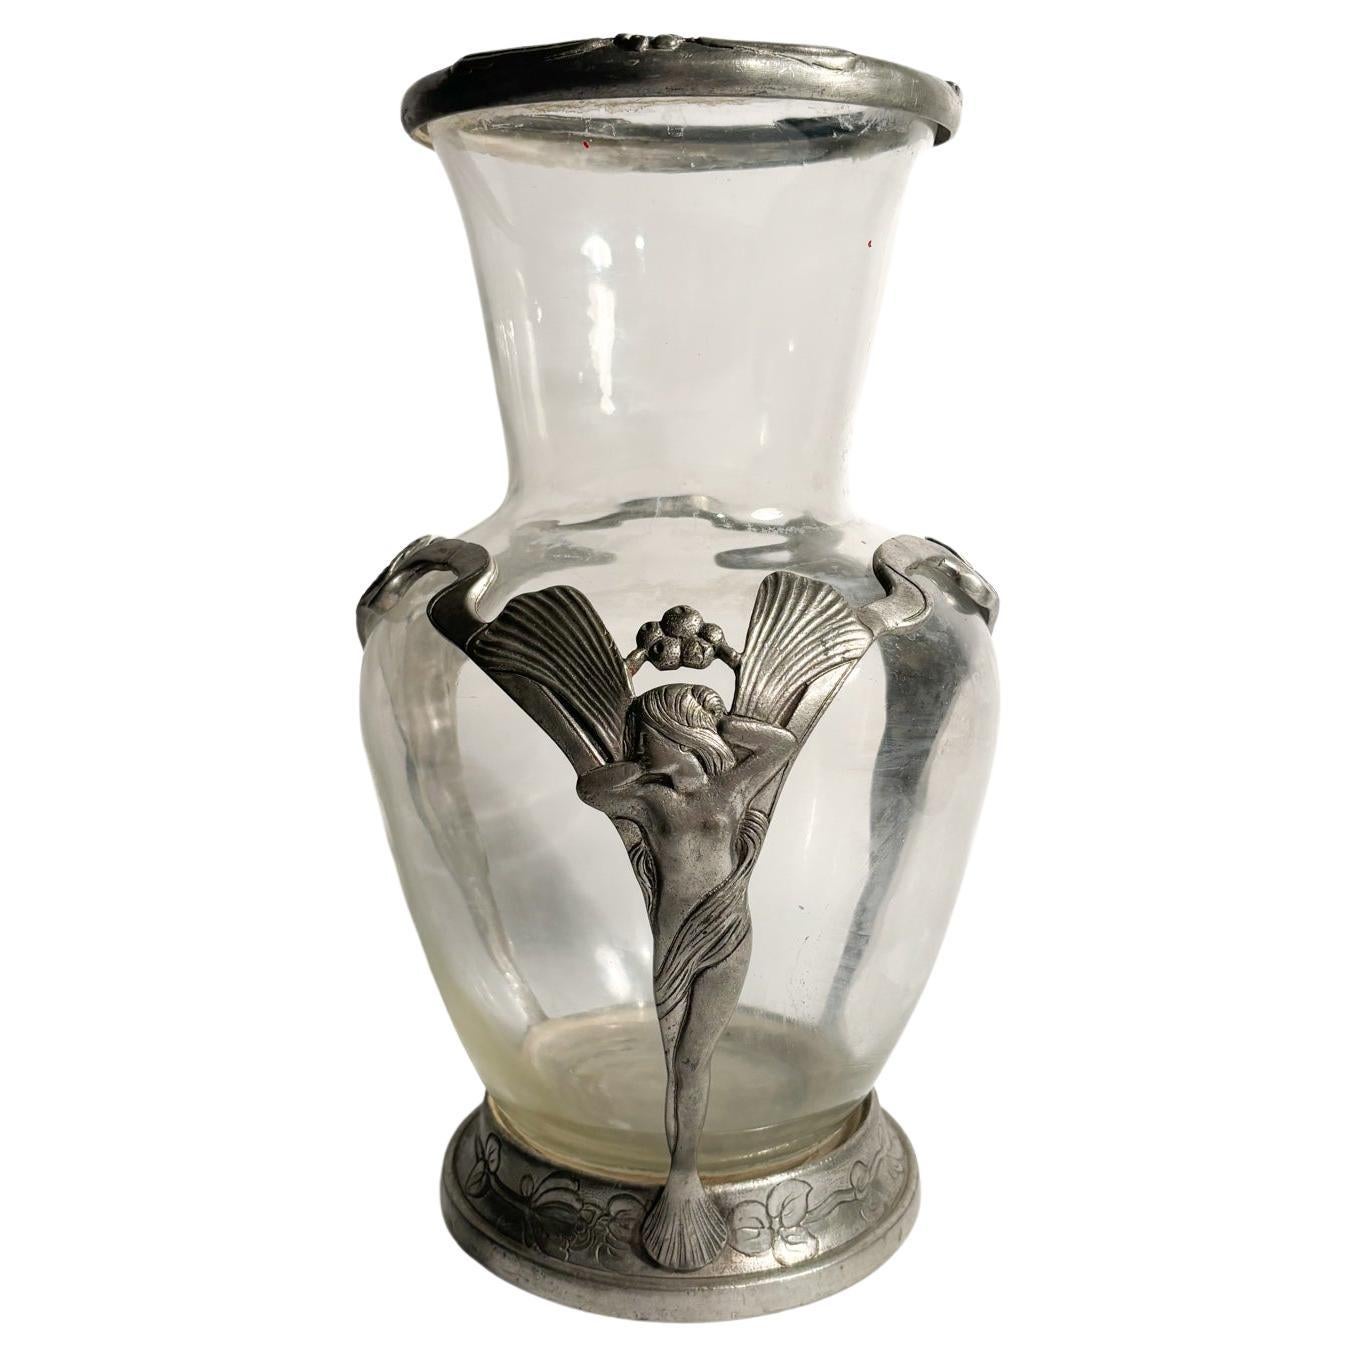 Art Nouveau Vase in and Sculpted Pewter from the Early Twentieth Century